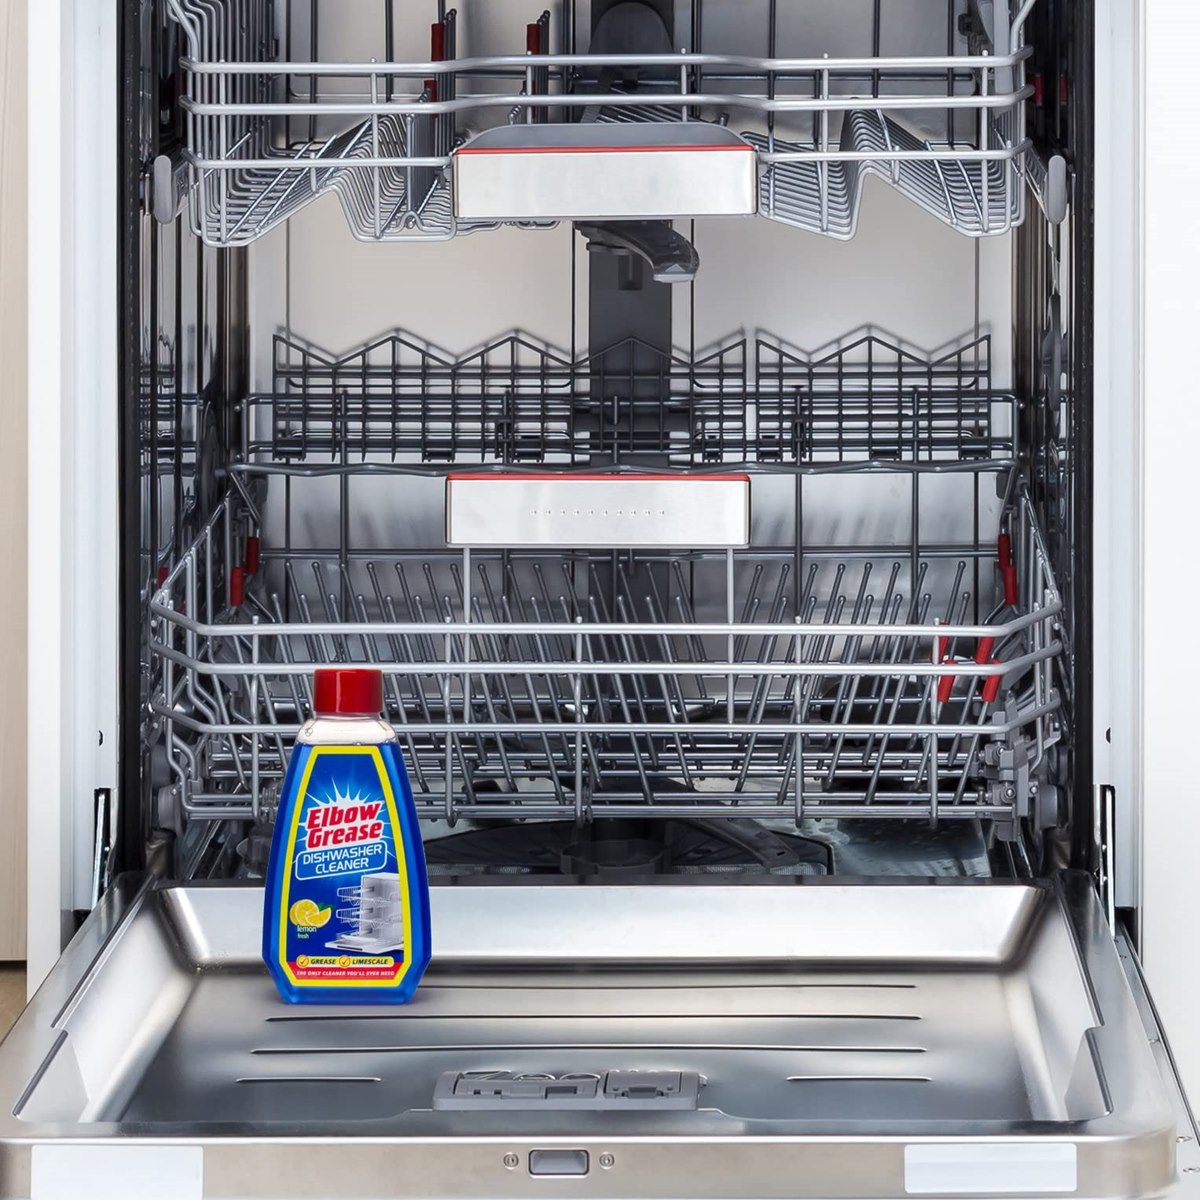 How-to-make-a-dishwasher-clean